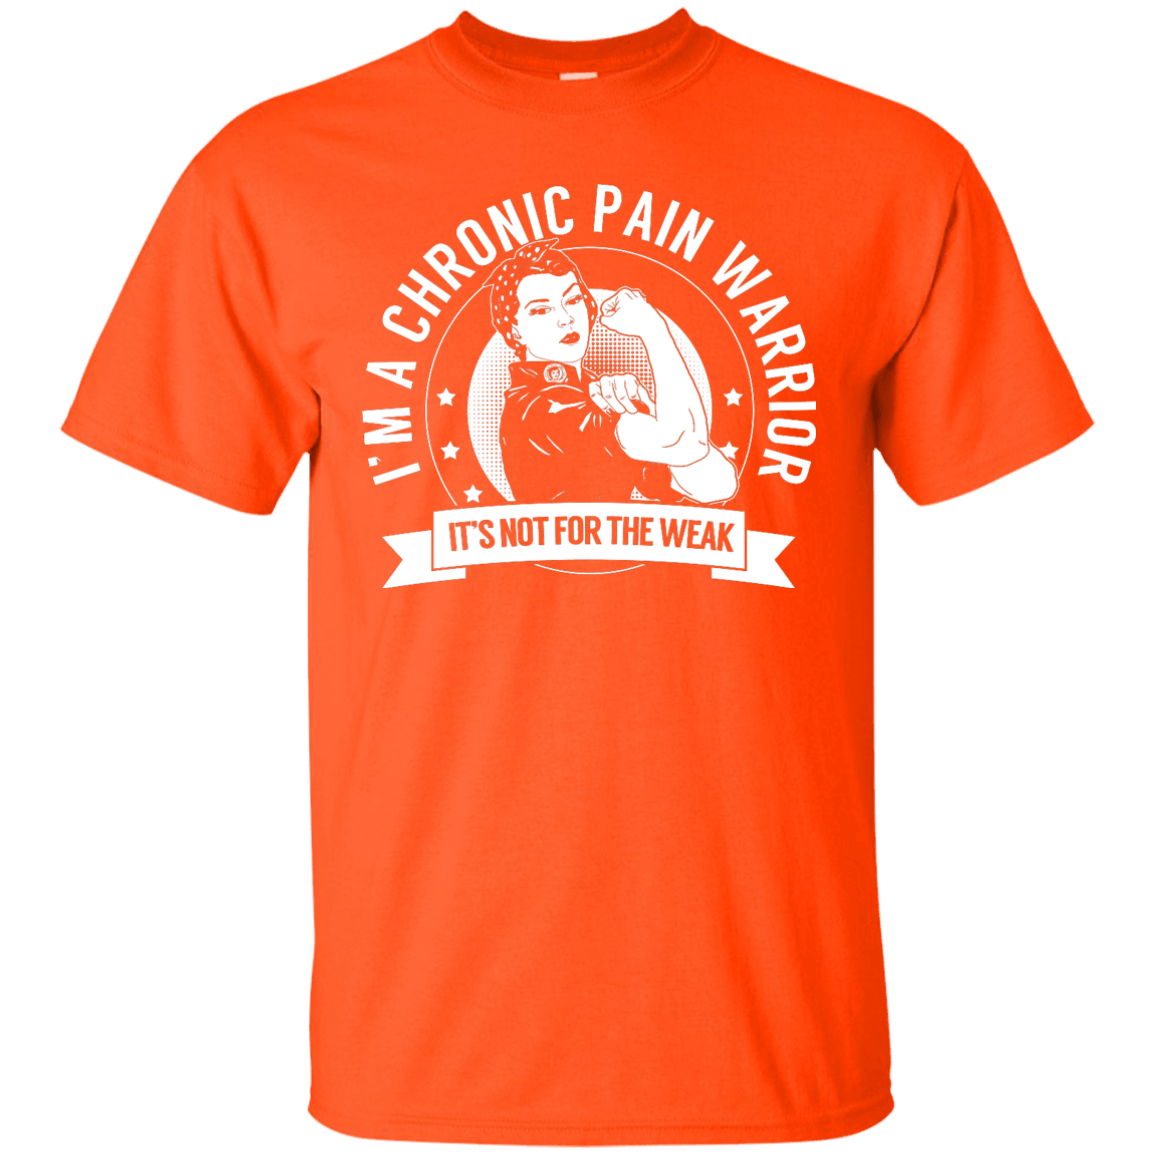 Chronic Pain Warrior Not For The Weak Unisex Shirt - The Unchargeables